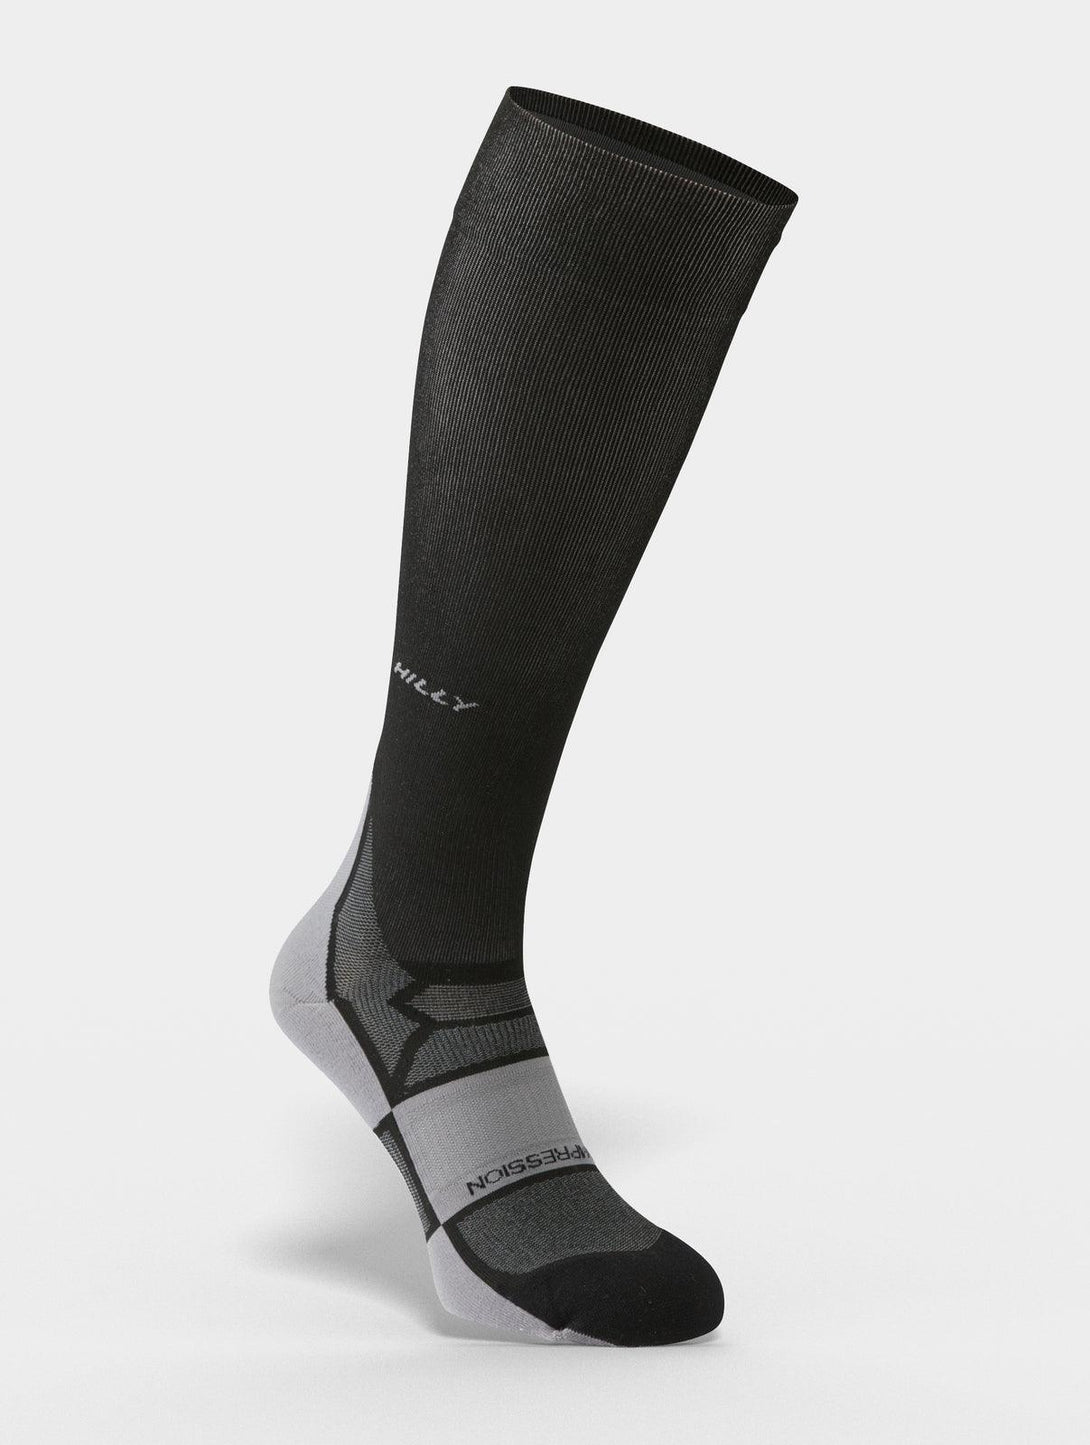 Rugby Heaven Hilly Pulse Compression Socks Black - www.rugby-heaven.co.uk